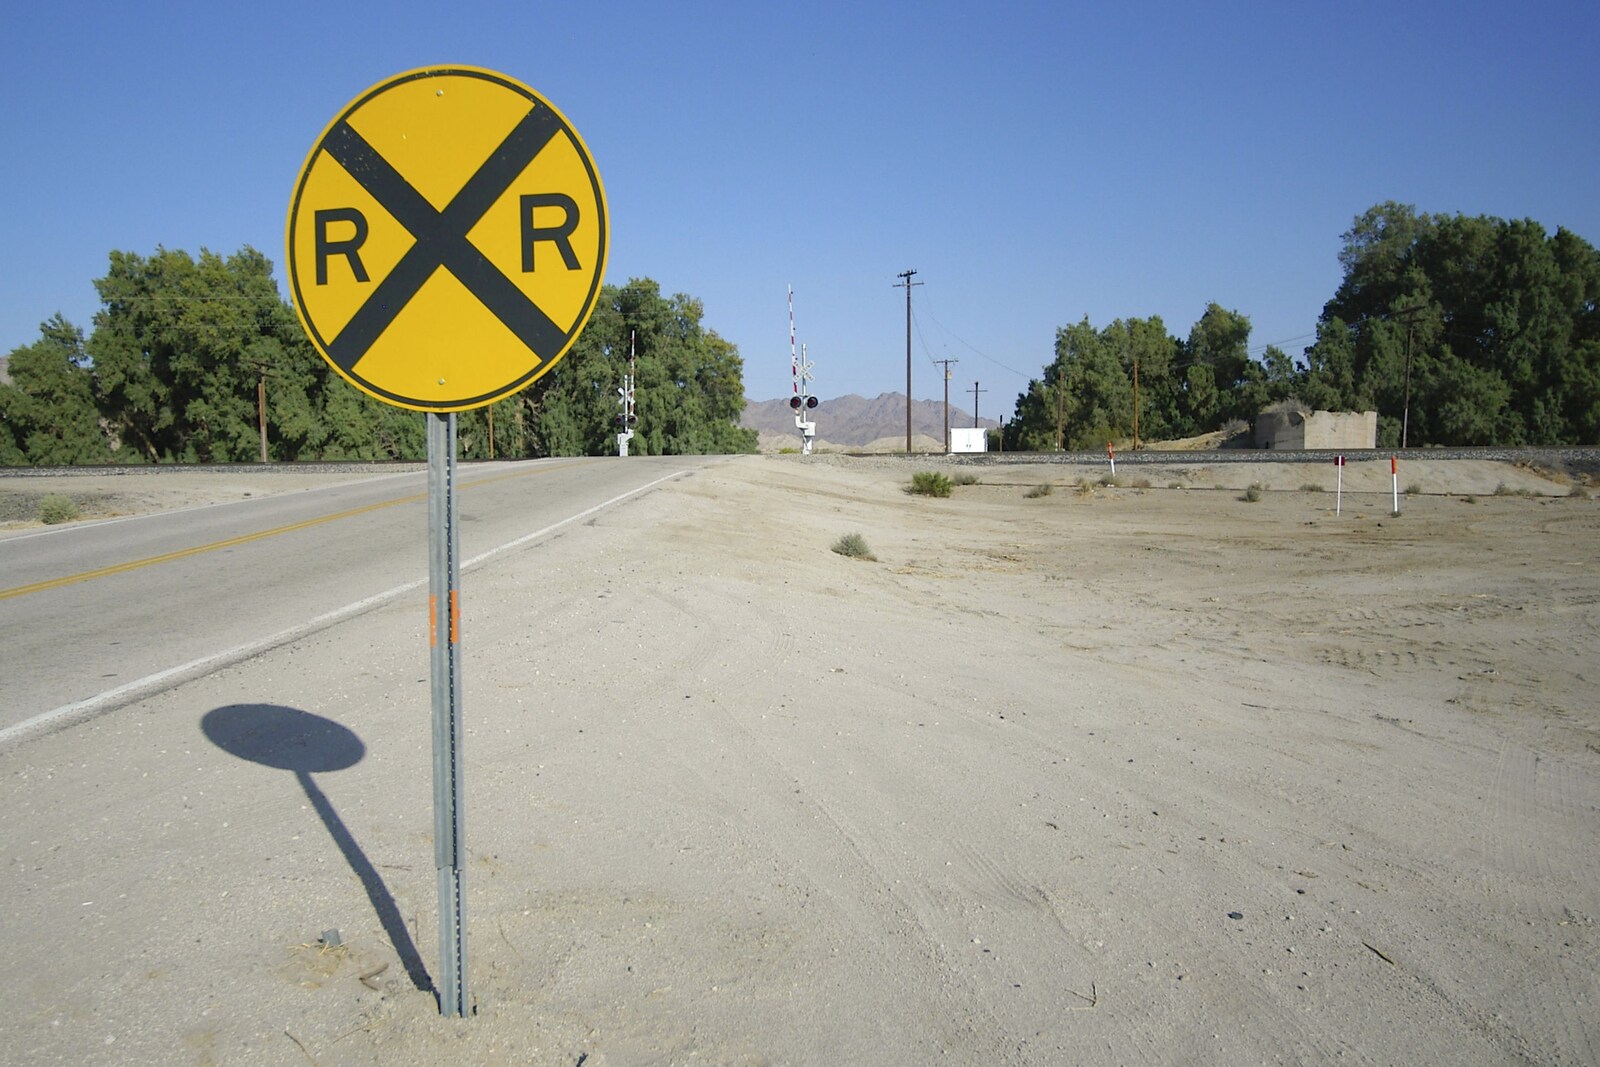 A railroad crossing from San Diego Seven: The Desert and the Dunes, Arizona and California, US - 22nd April